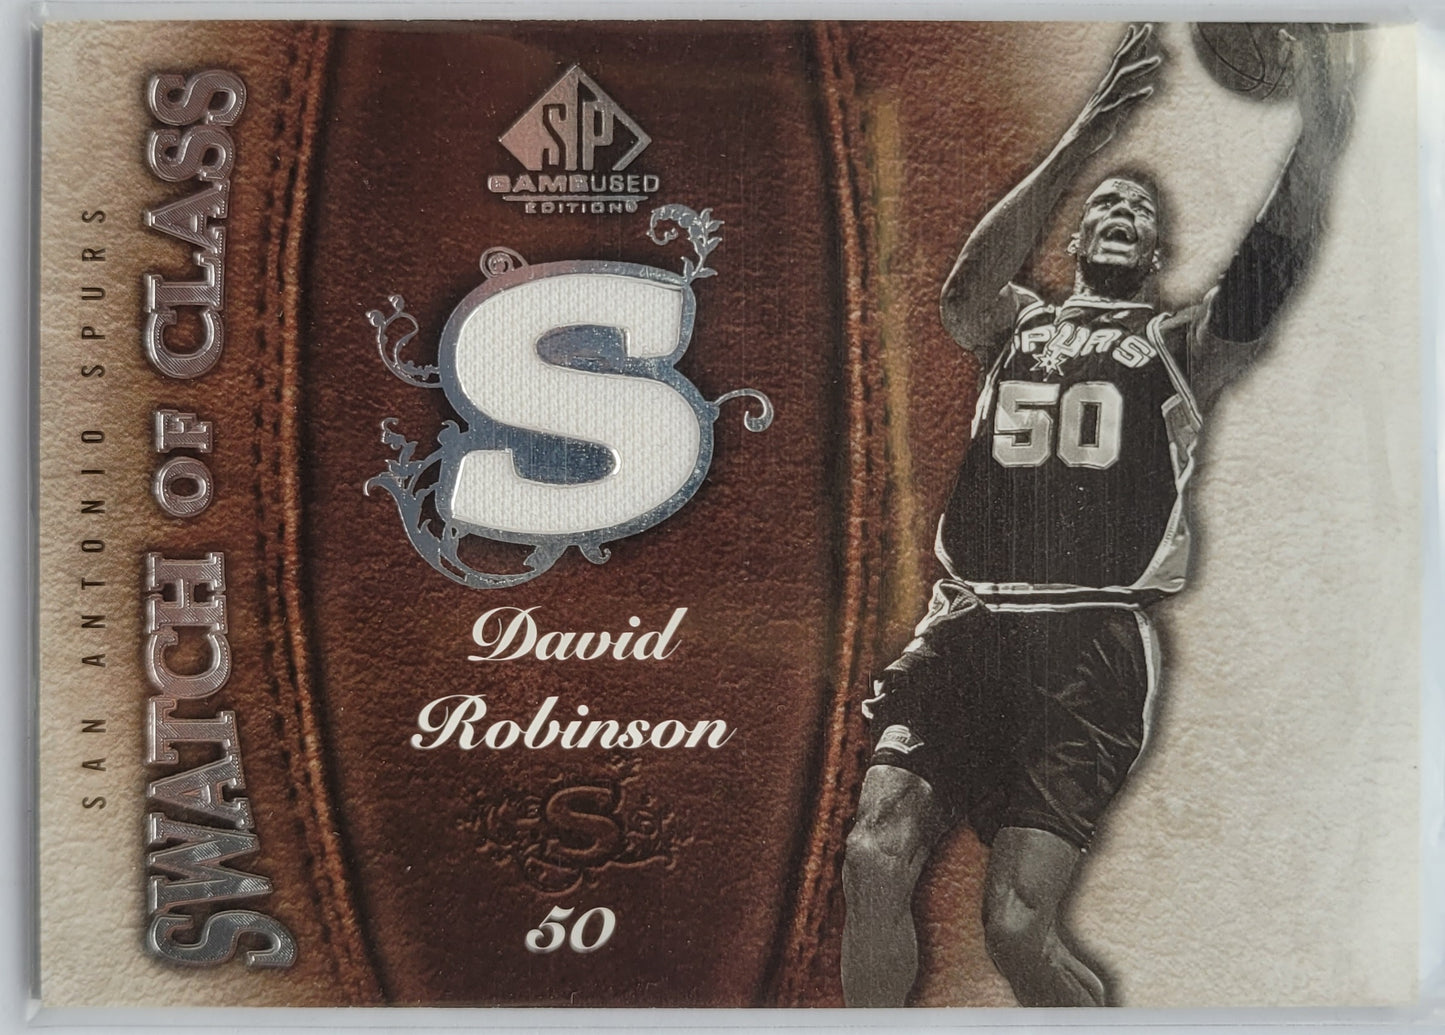 David Robinson - 2007-08 SP Game Used Swatch of Class #SCDR